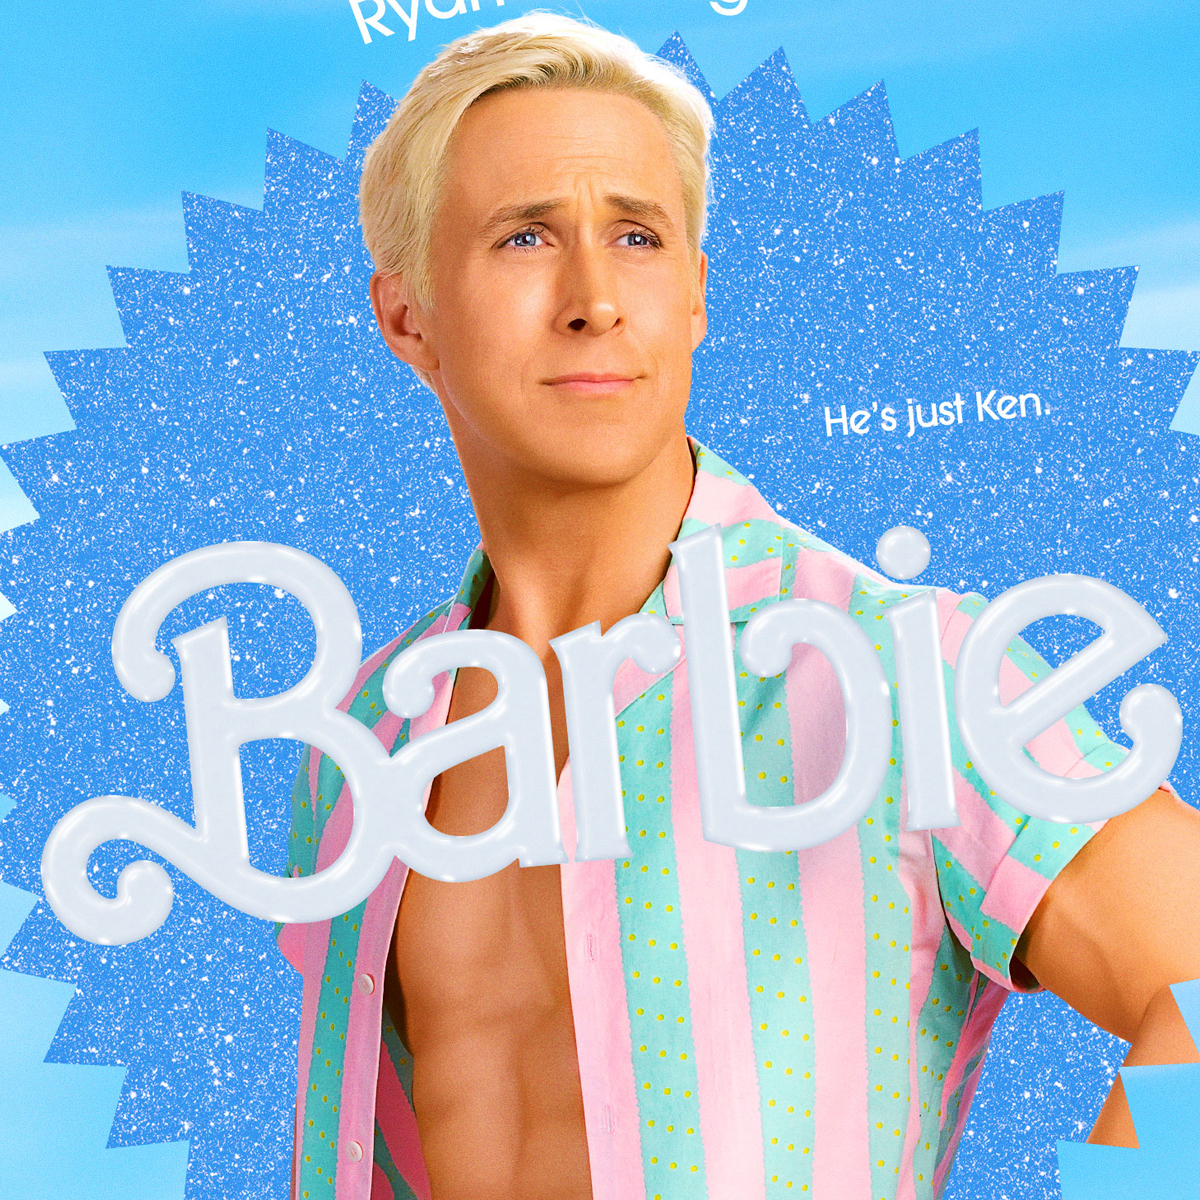 Barbie Fans Now Divided Over The Look Of Ryan Gosling's Ken, 59% OFF